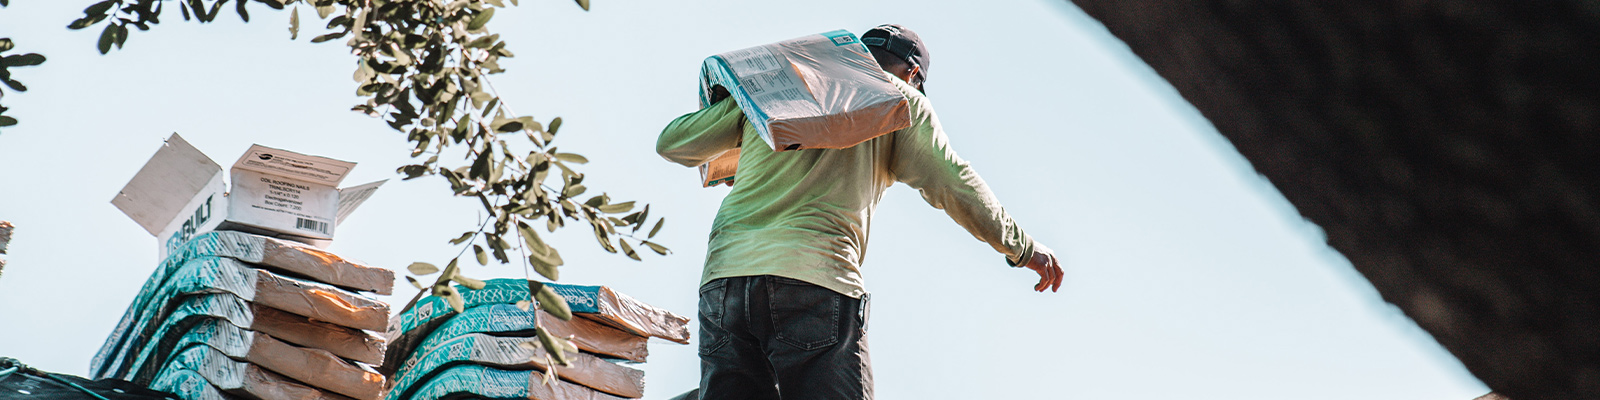 man carrying shingles on a residential roof